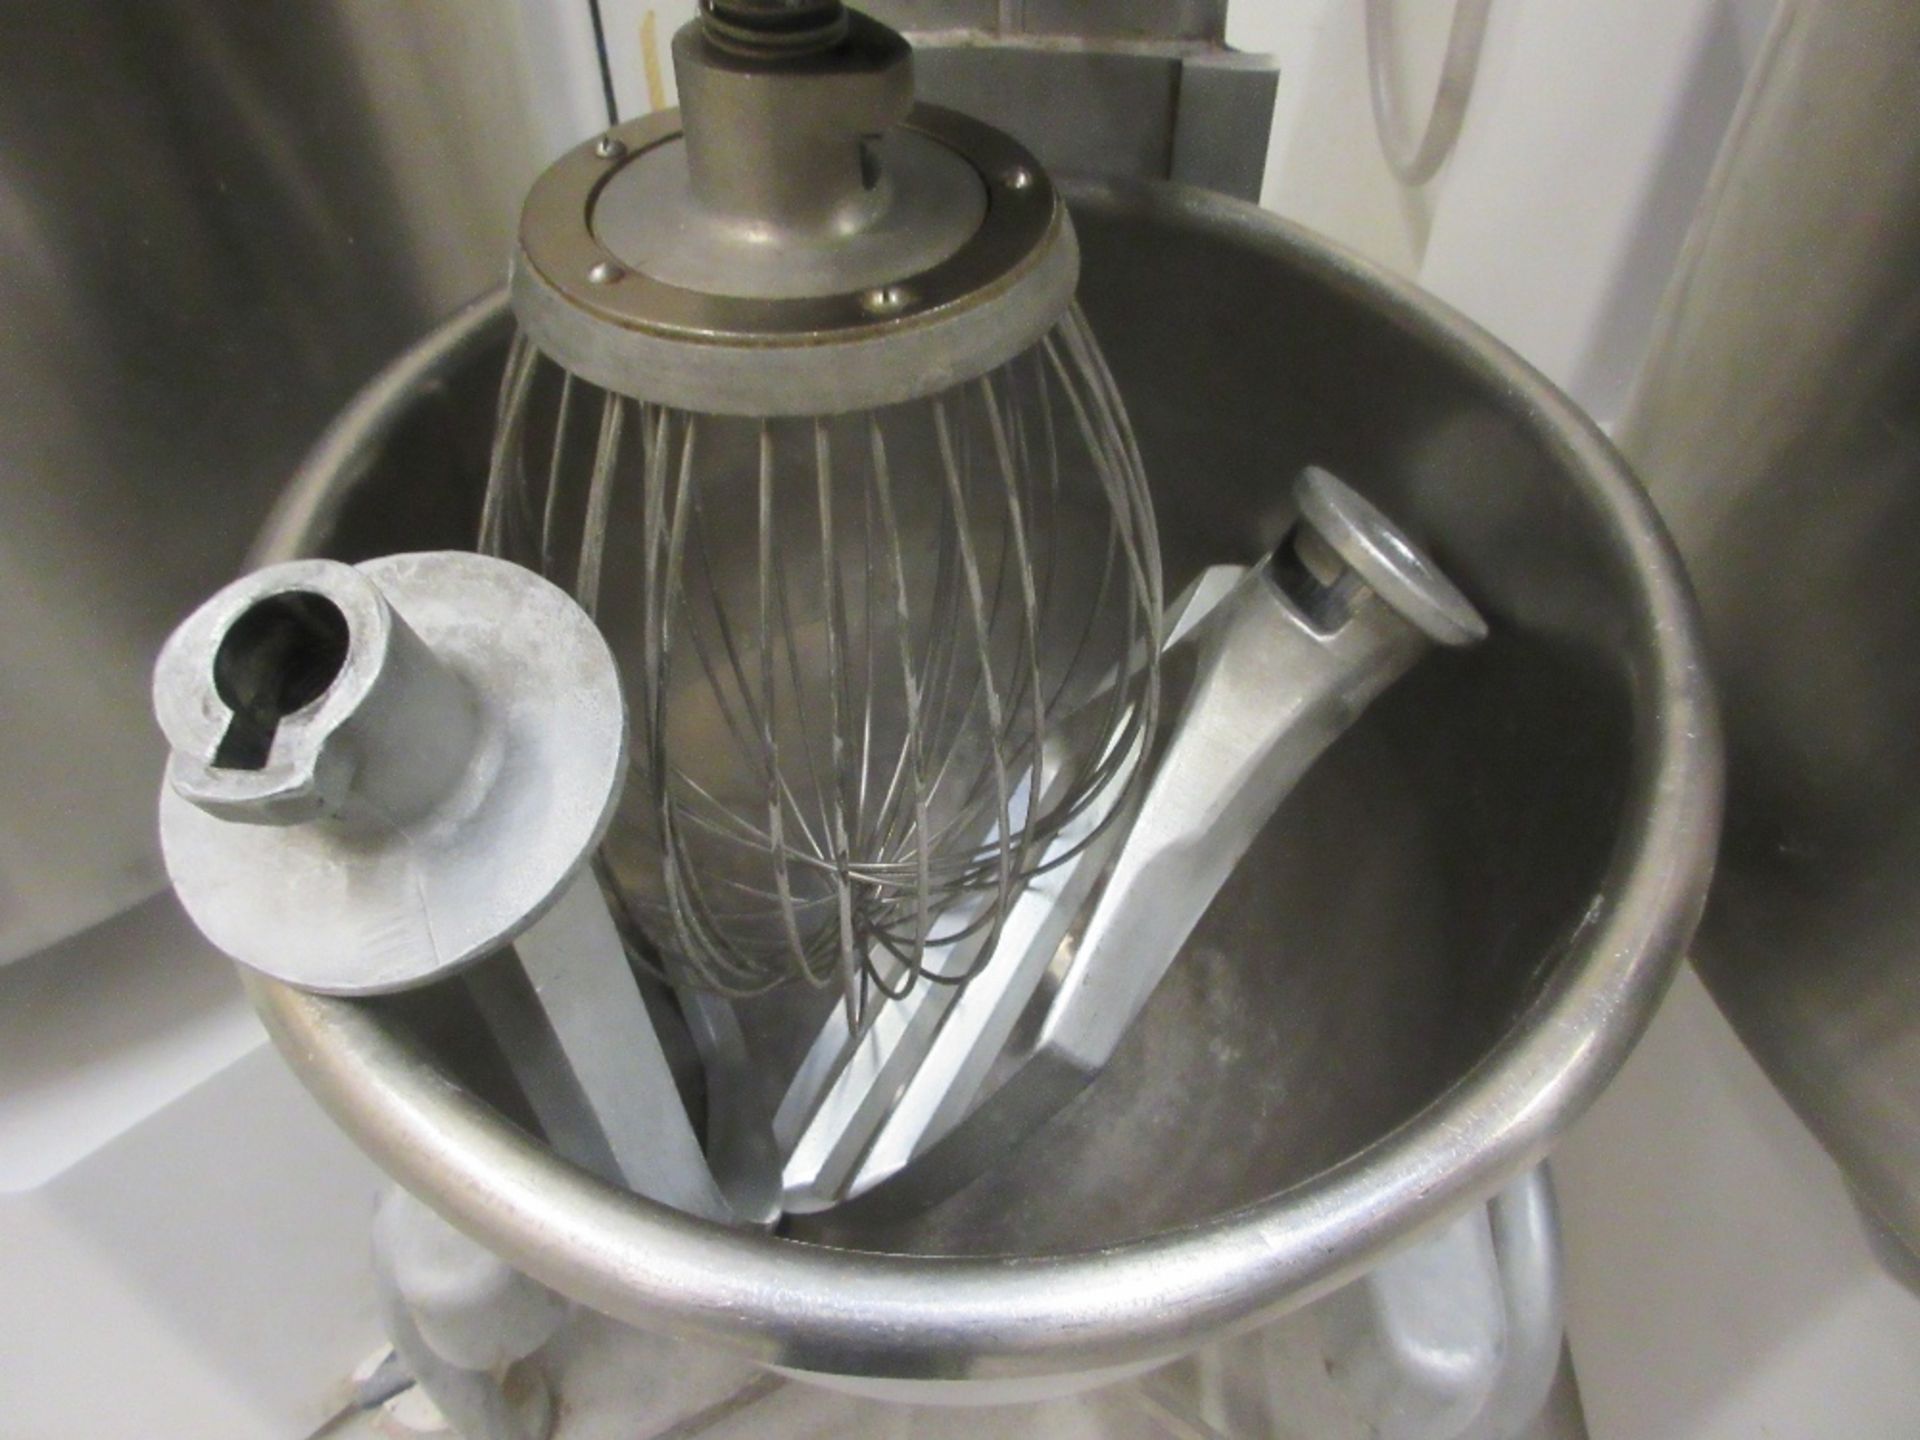 Crypto Peerless rotary commercial bowl mixing machine on stand - Image 3 of 3